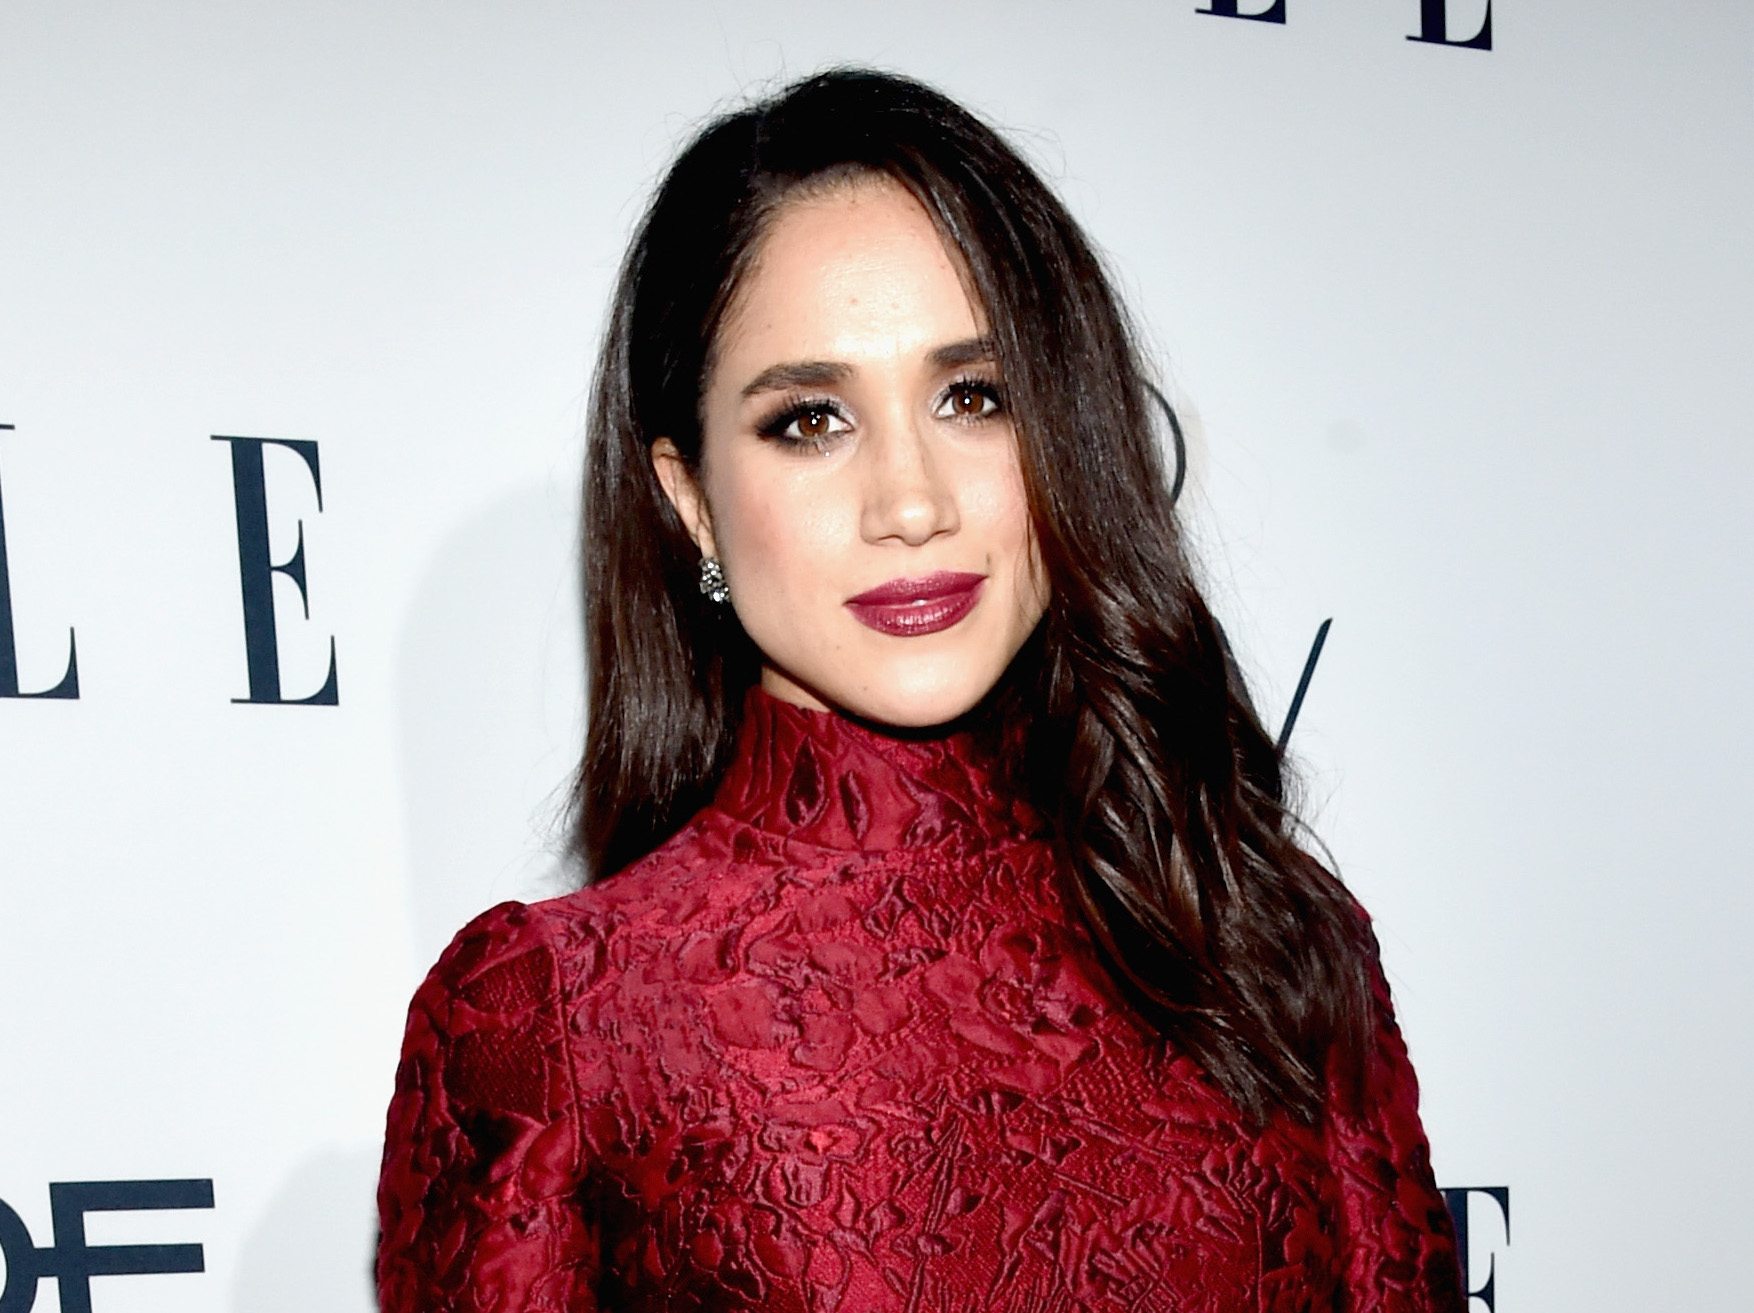 Actress Meghan Markle attends ELLE's 6th Annual Women In Television Dinner